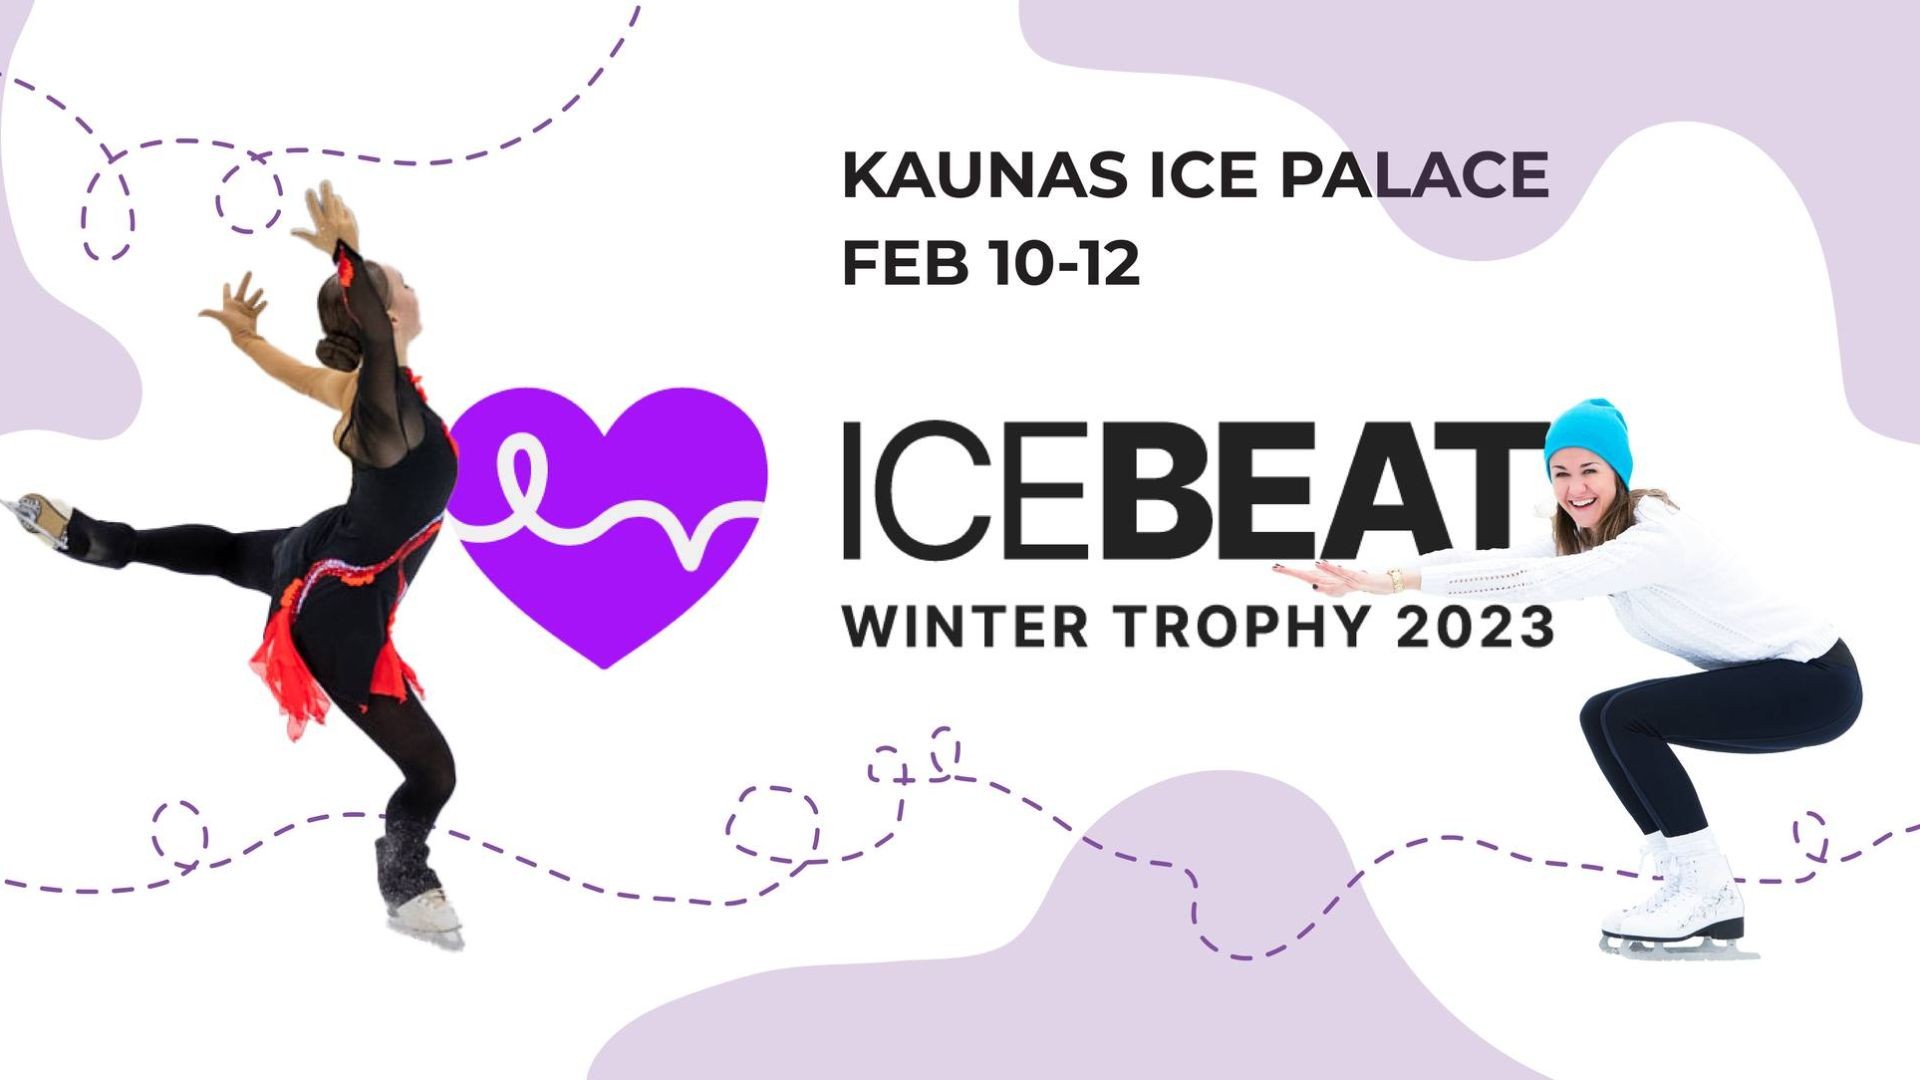 Day 1 | Icebeat Winter Trophy 2023